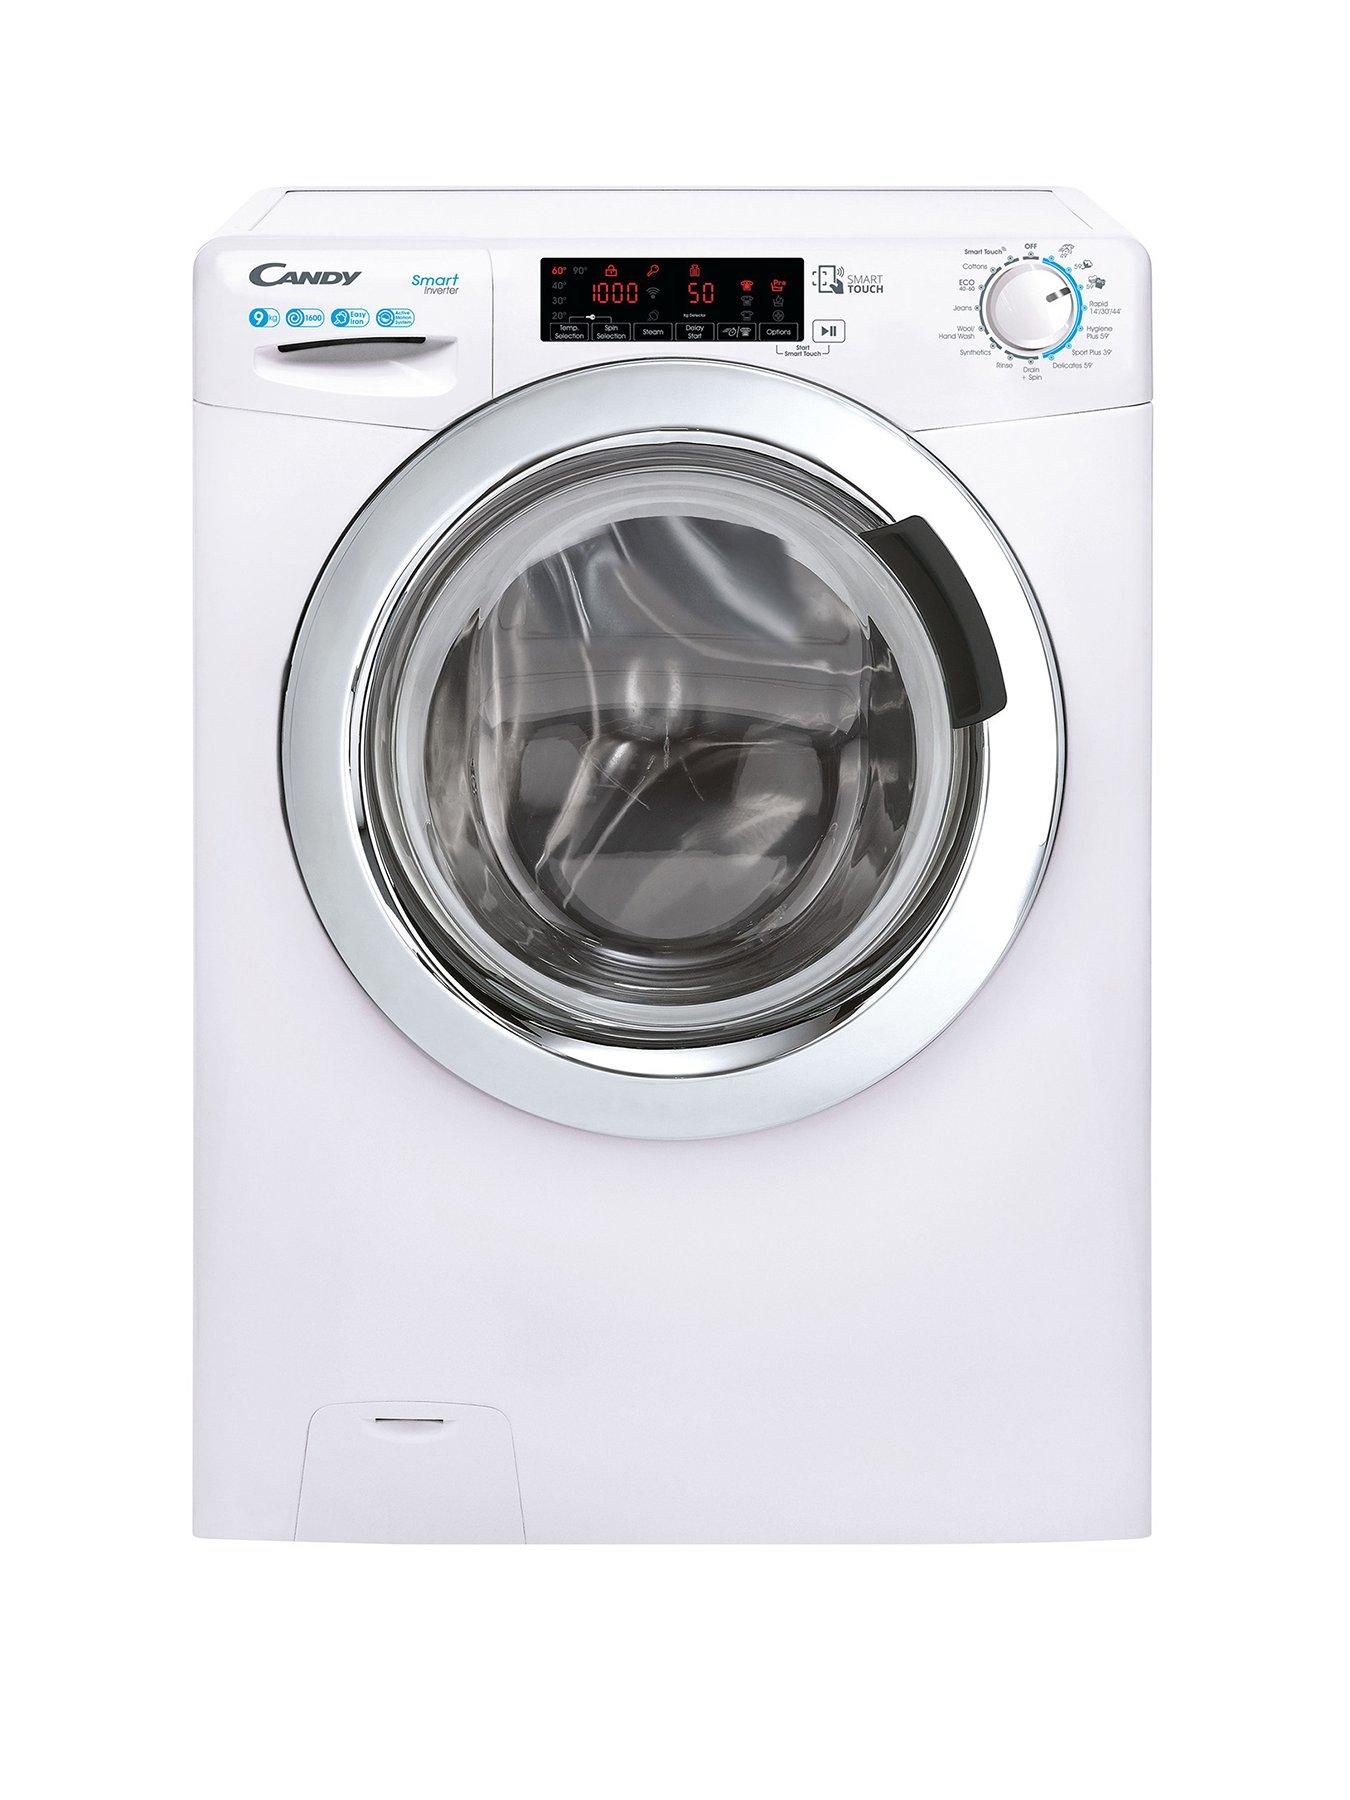 Candy Smart Pro Css 69Twmce/1-80 9Kg Load, 1600 Rpm Spin Washing Machine, A-Rated - White With Chrome Door